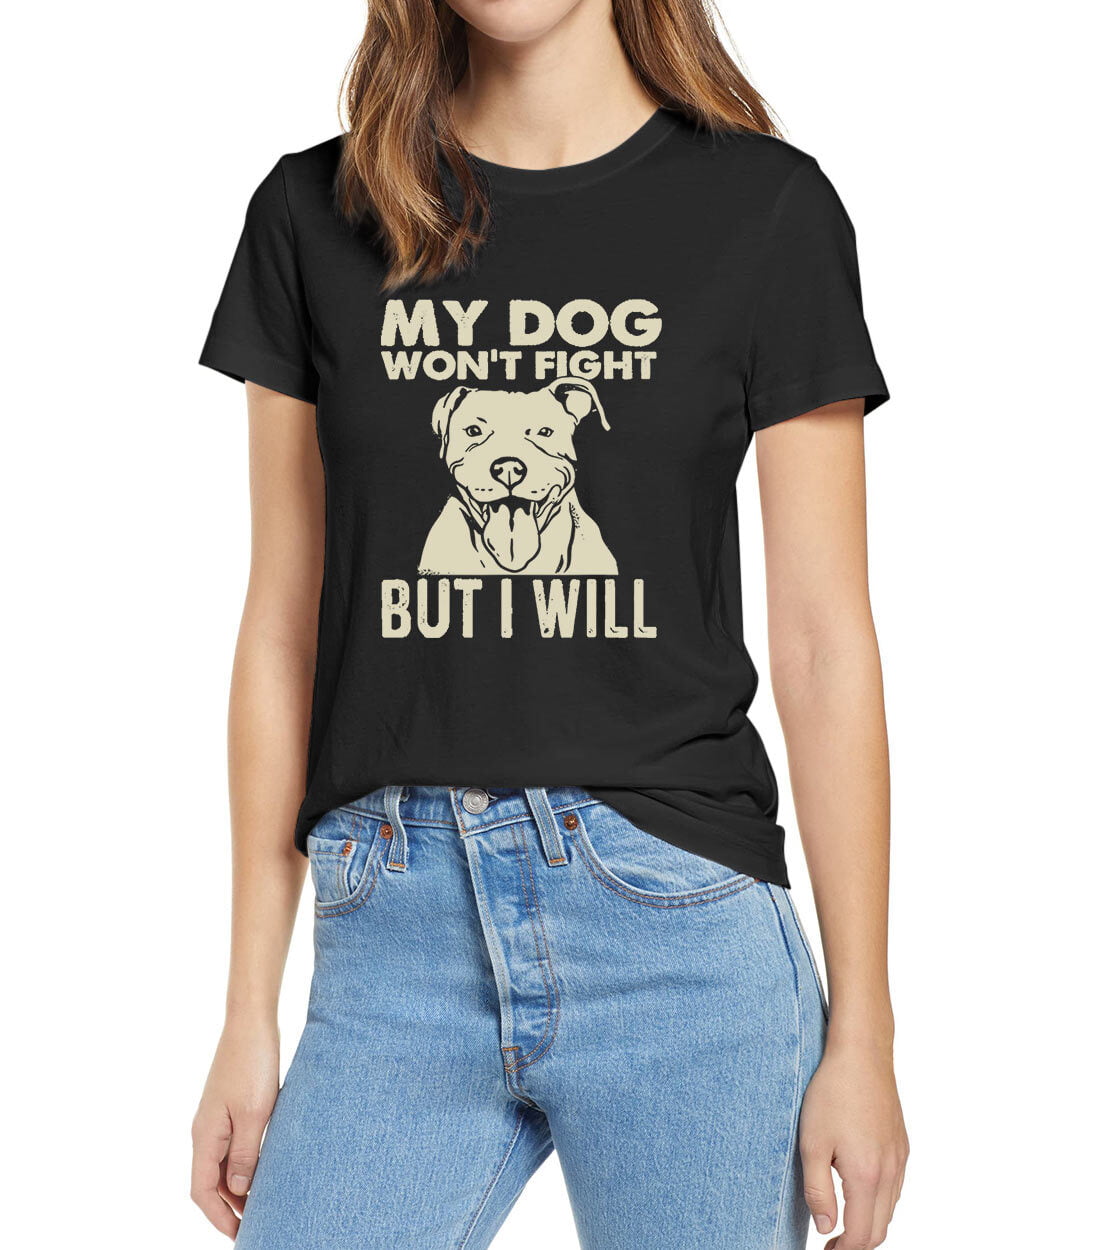 I Don't Give a Pit Mens & Women's 100% cotton shirt. Gift idea for Pitbull dog lovers Unisex T-shirt Funny Dog Tee